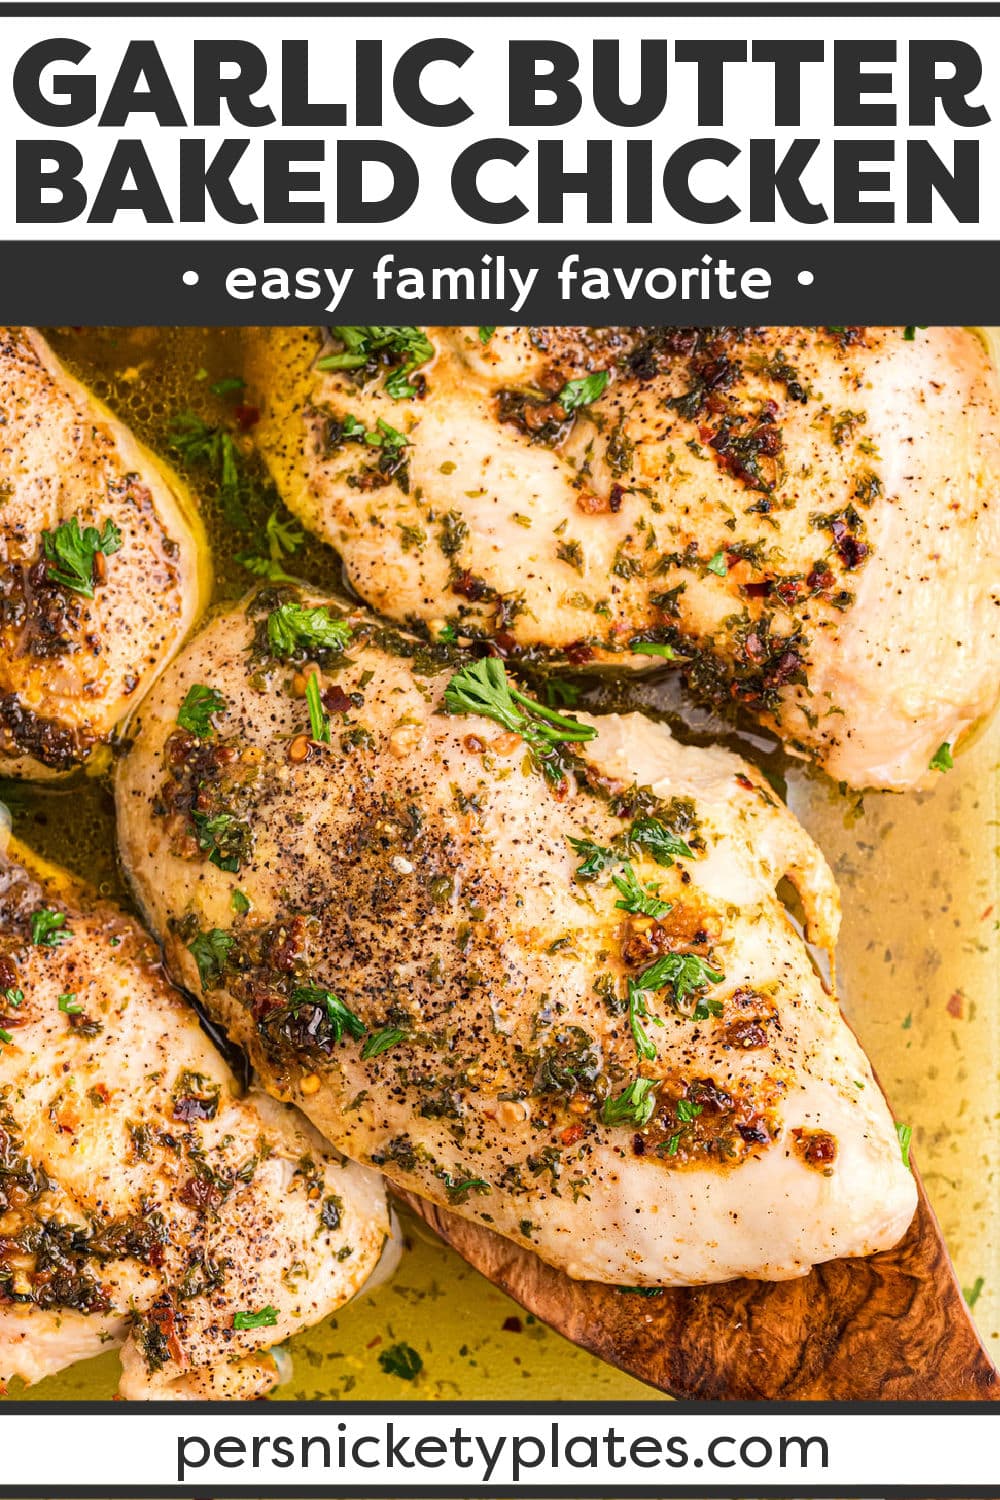 Garlic Butter Baked Chicken is an easy chicken recipe that is simple yet impressive. Made with a garlic-infused butter sauce, the meat is juicy, tender, and full of flavor. Serve it with your favorite sides and you've got a simple dinner ready for the family in under an hour! | www.persnicketyplates.com